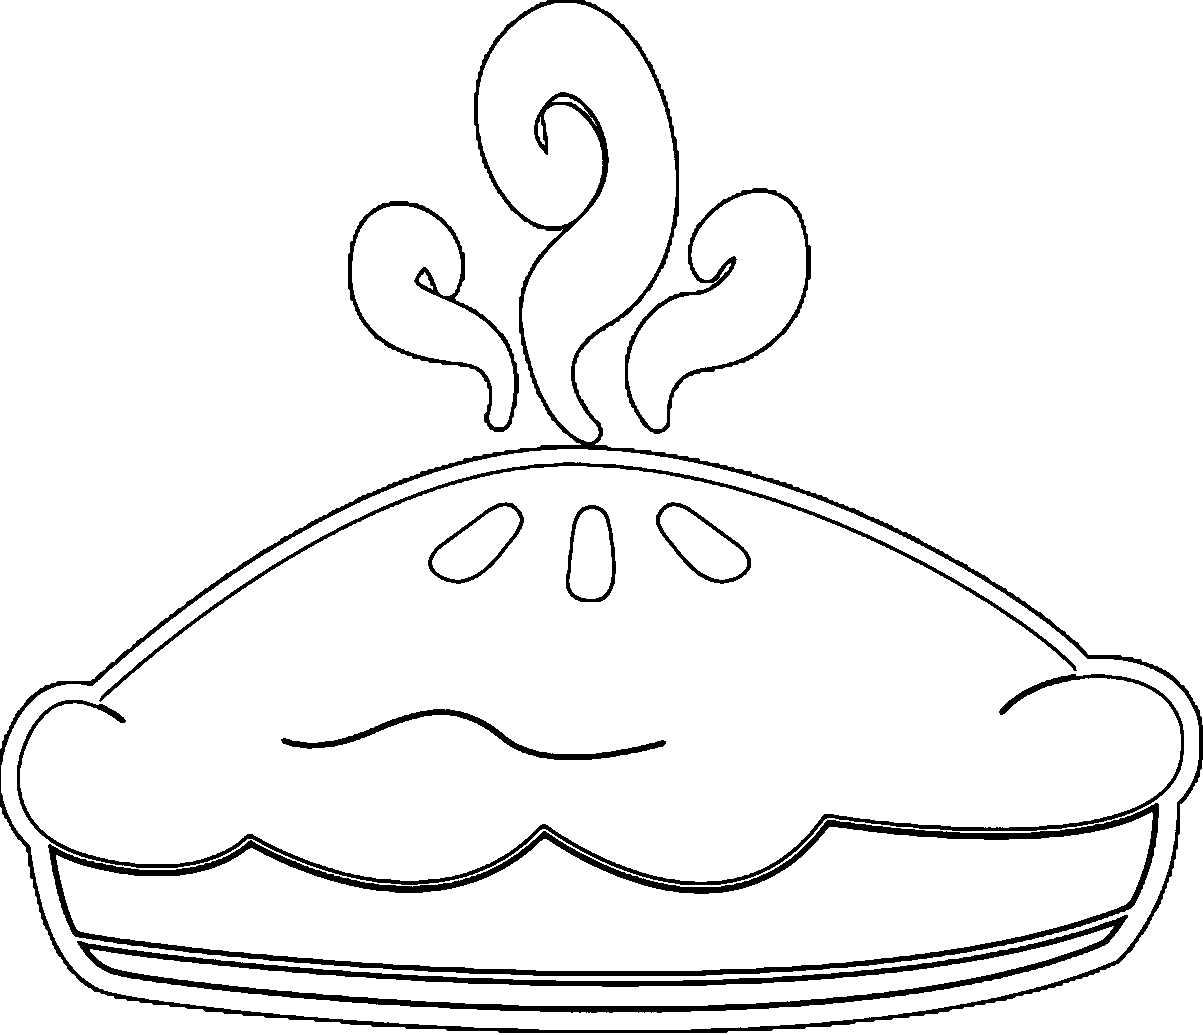 pie coloring page pie coloring pages getcoloringpagescom coloring page pie 